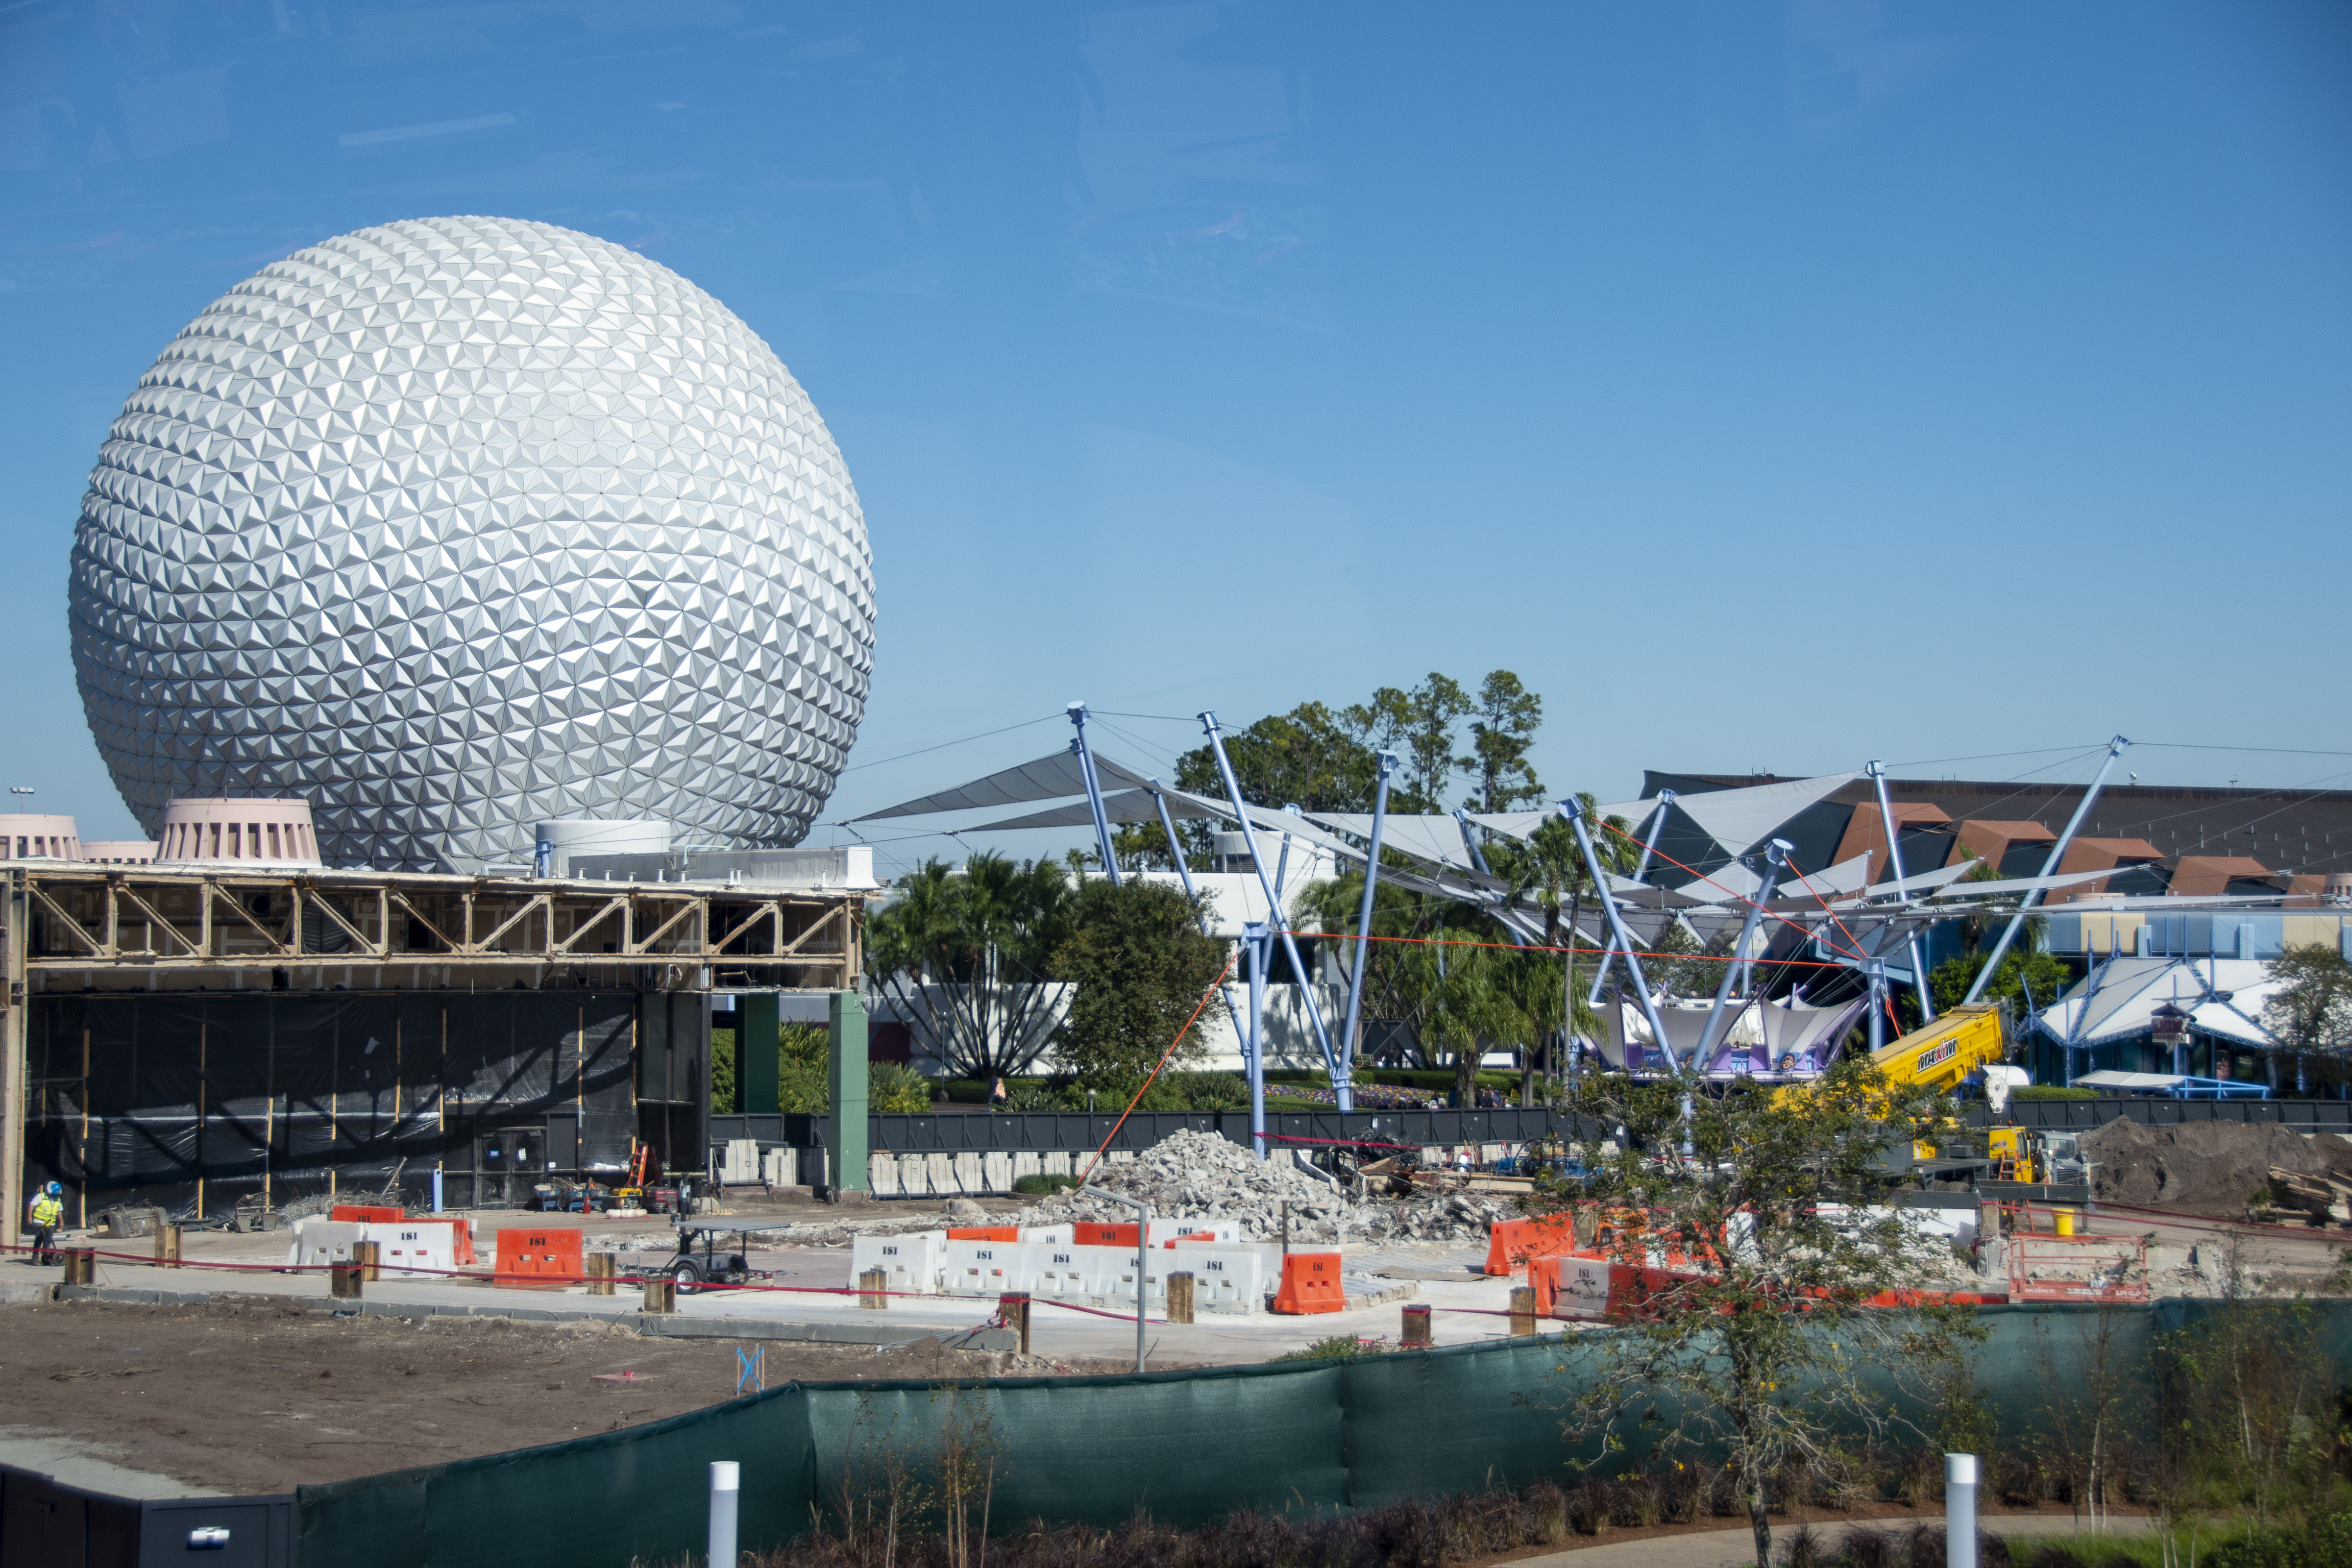 PHOTOS: EPCOT Future World Construction Update (1/23/20) - WDW News Today